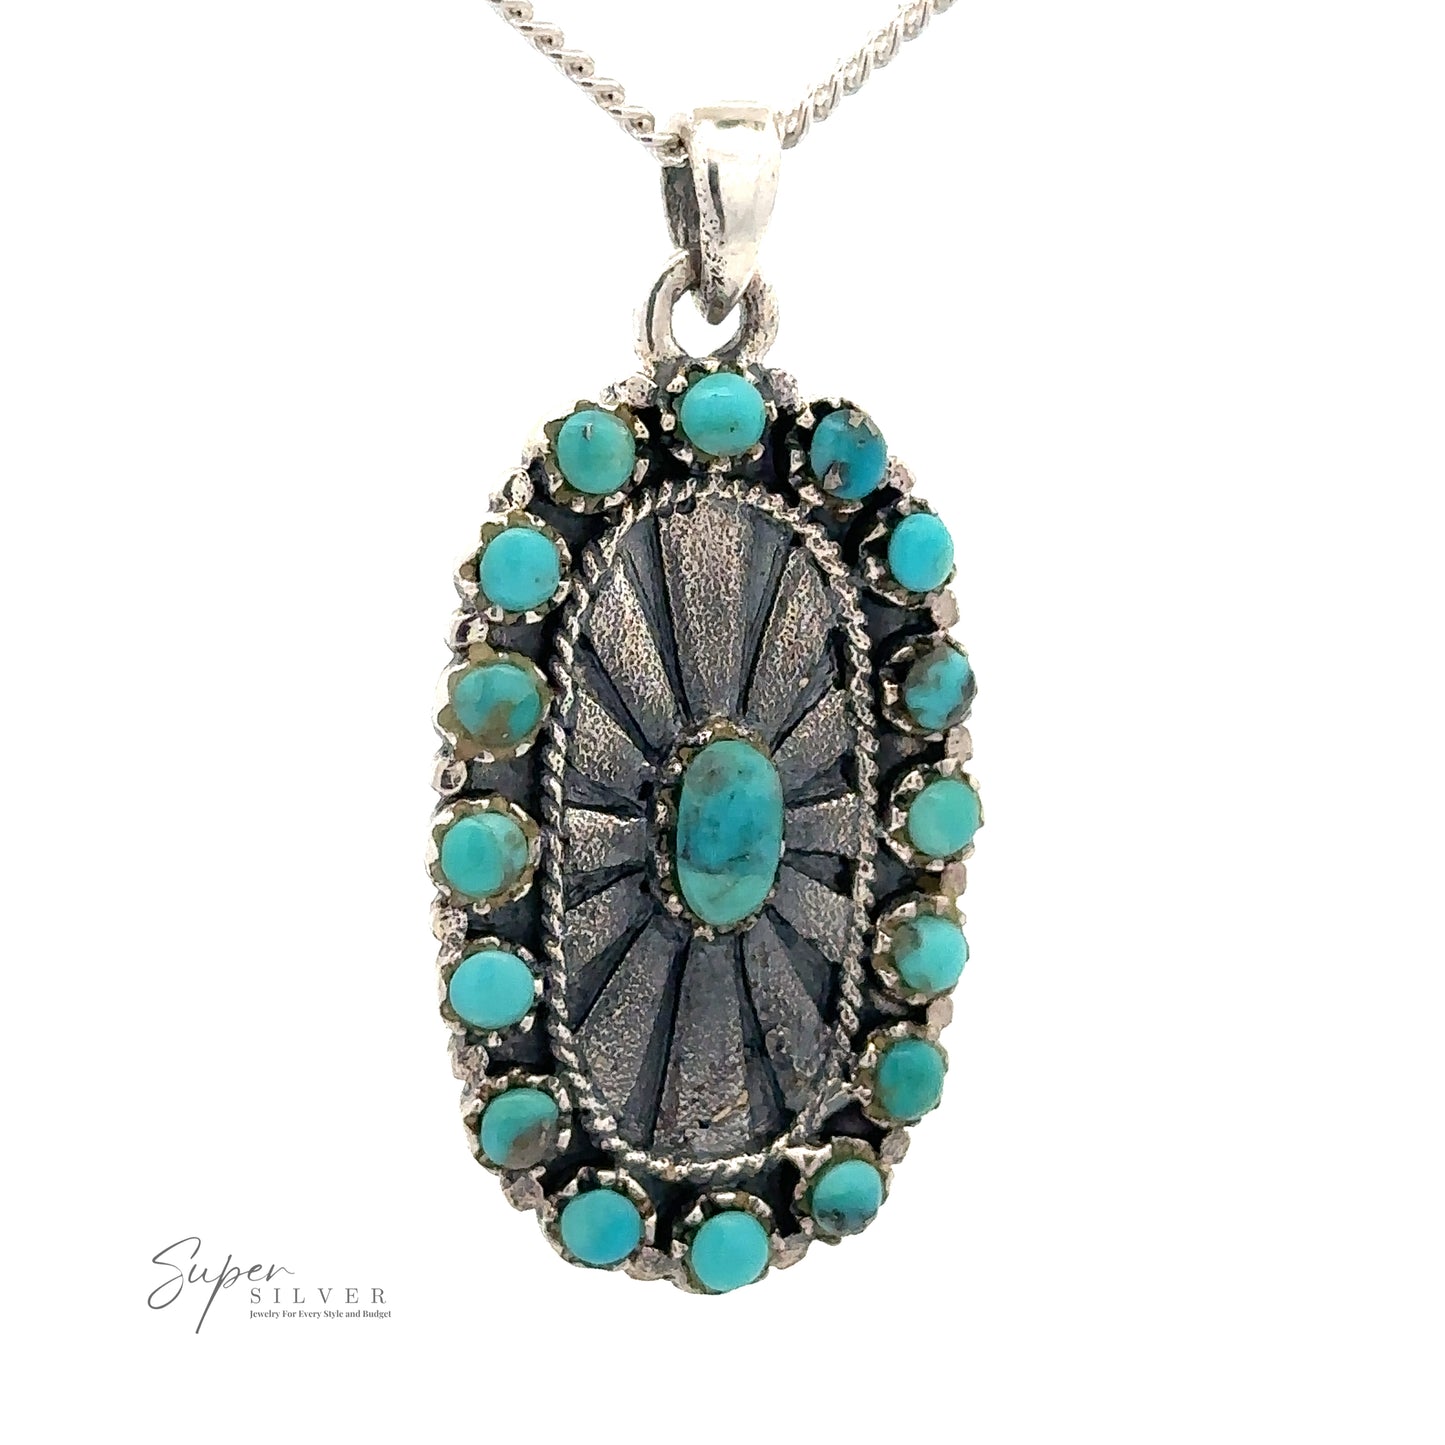 
                  
                    A Native Inspired Turquoise Pendant with turquoise stones surrounding an engraved center piece, radiating Southwestern charm, set against a white background. The "Super Silver" logo is visible in the bottom left corner.
                  
                